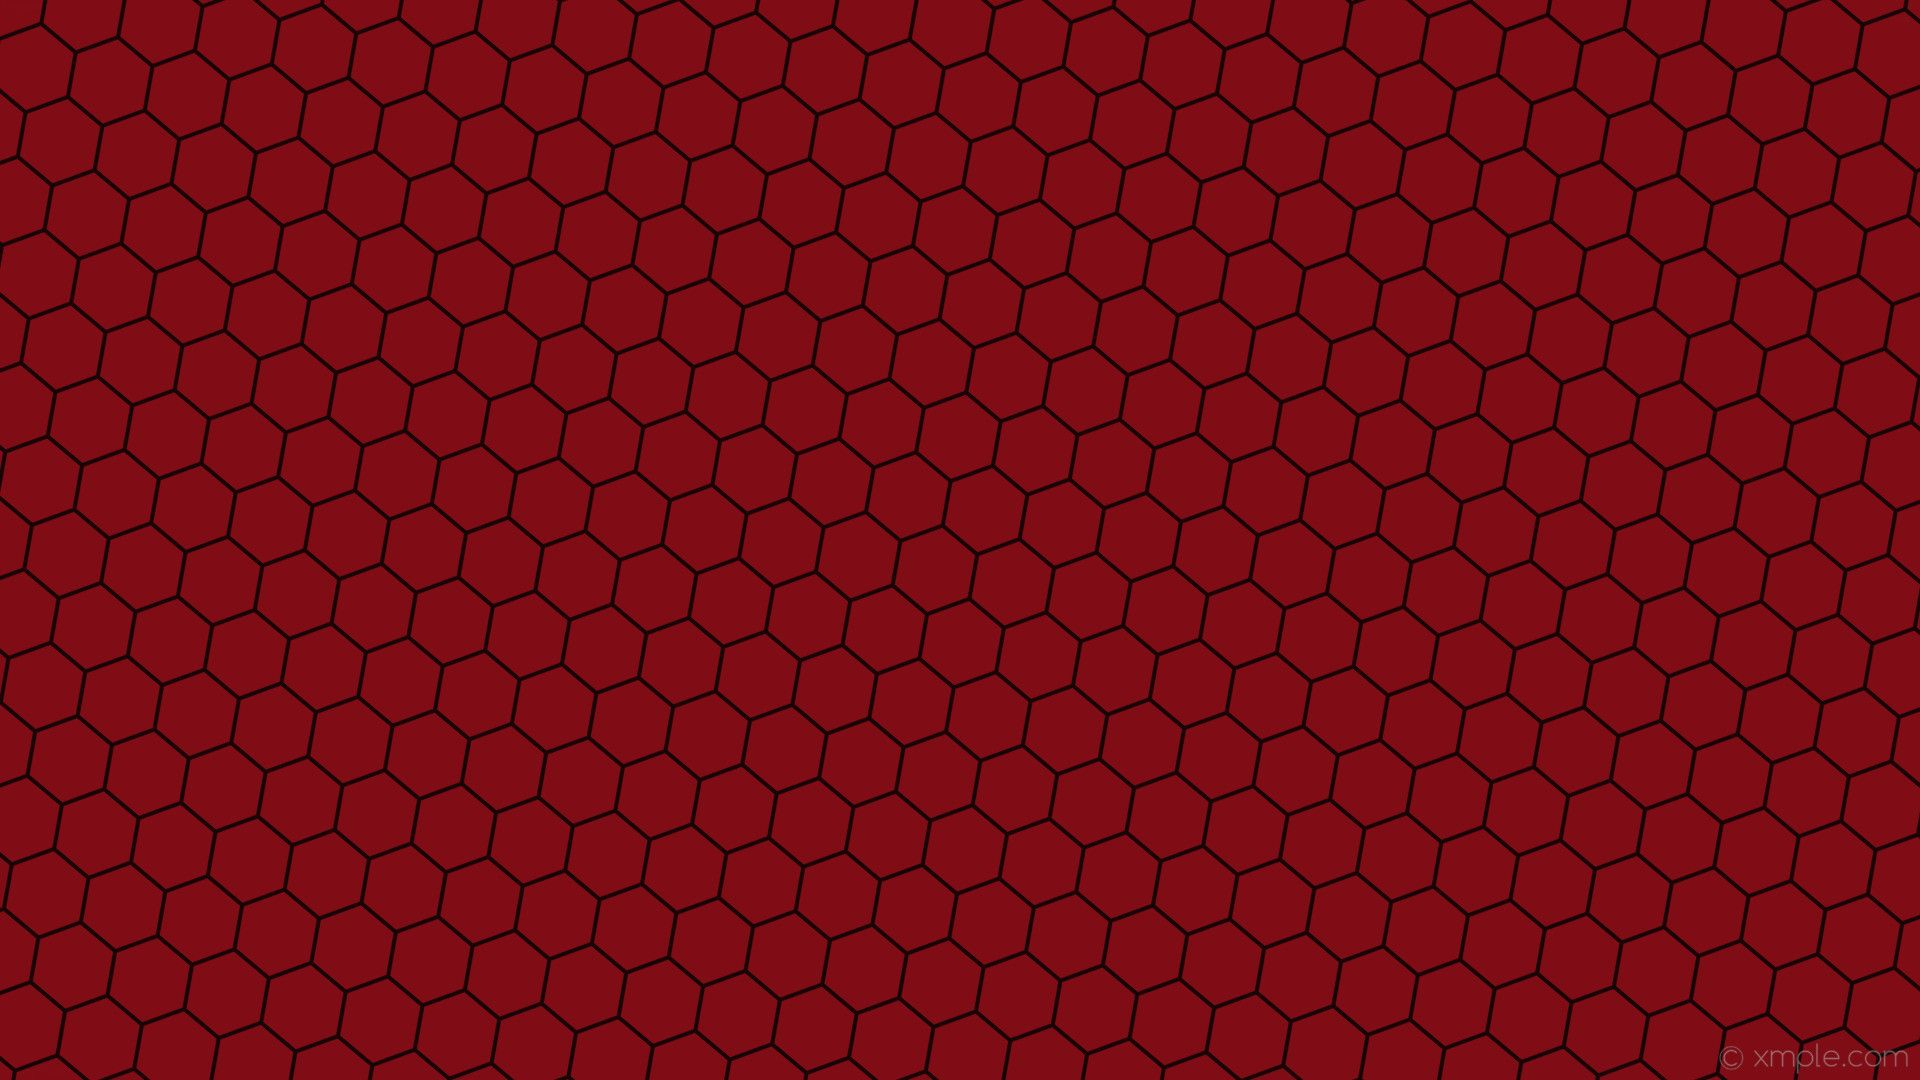 1920x1080 Gold Honeycomb Wallpapers